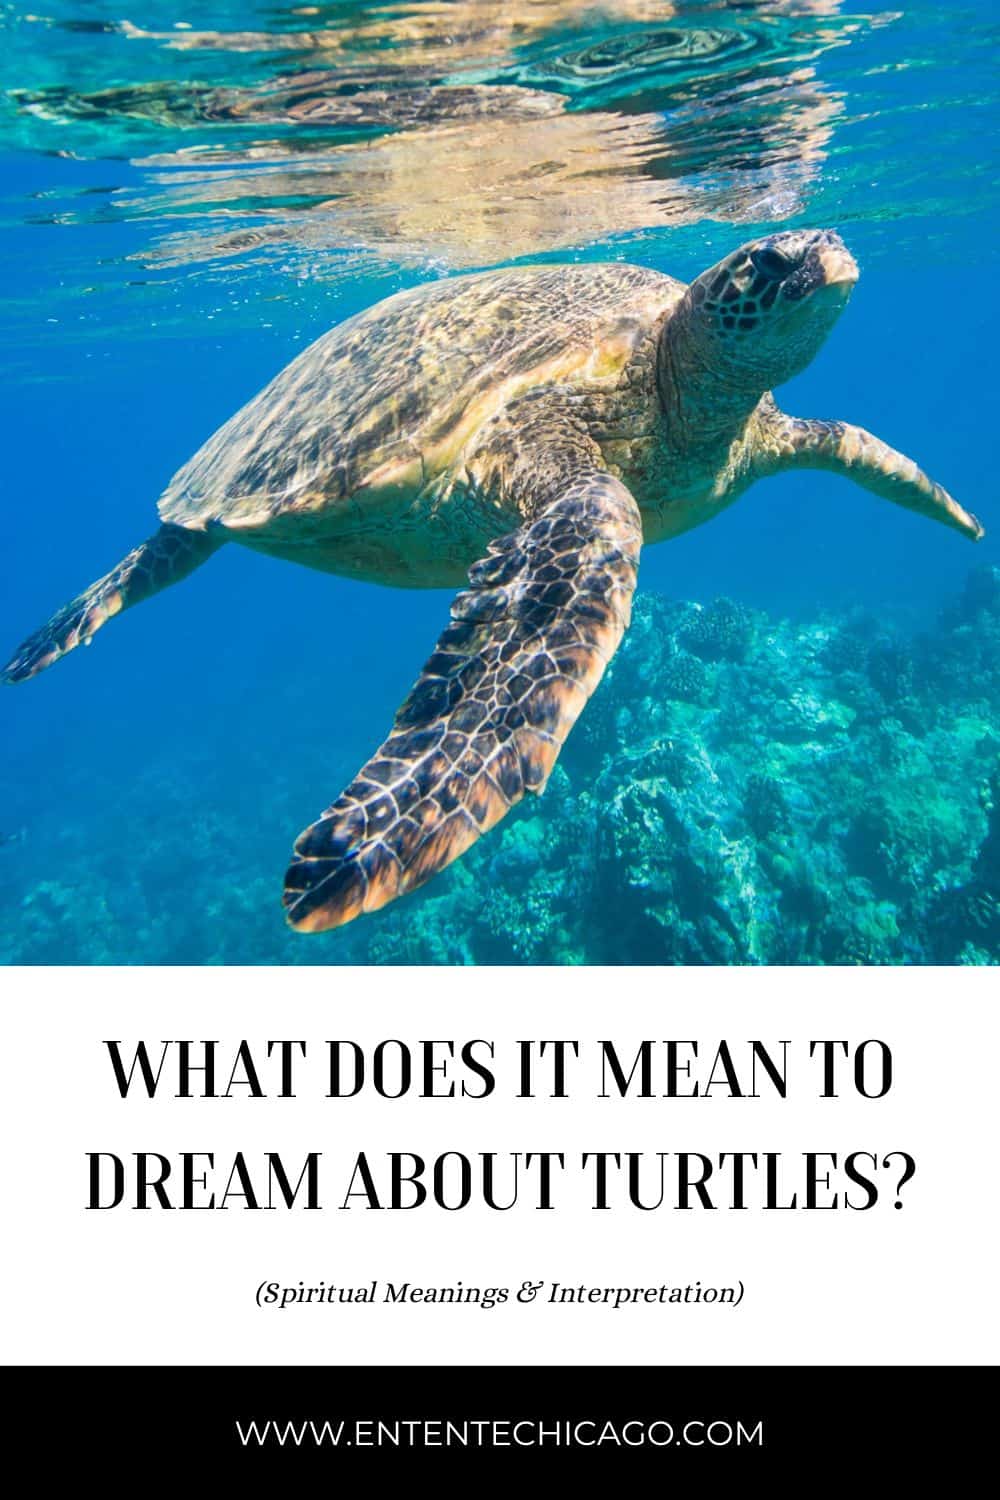 The Spiritual Meaning of Turtles in Dreams